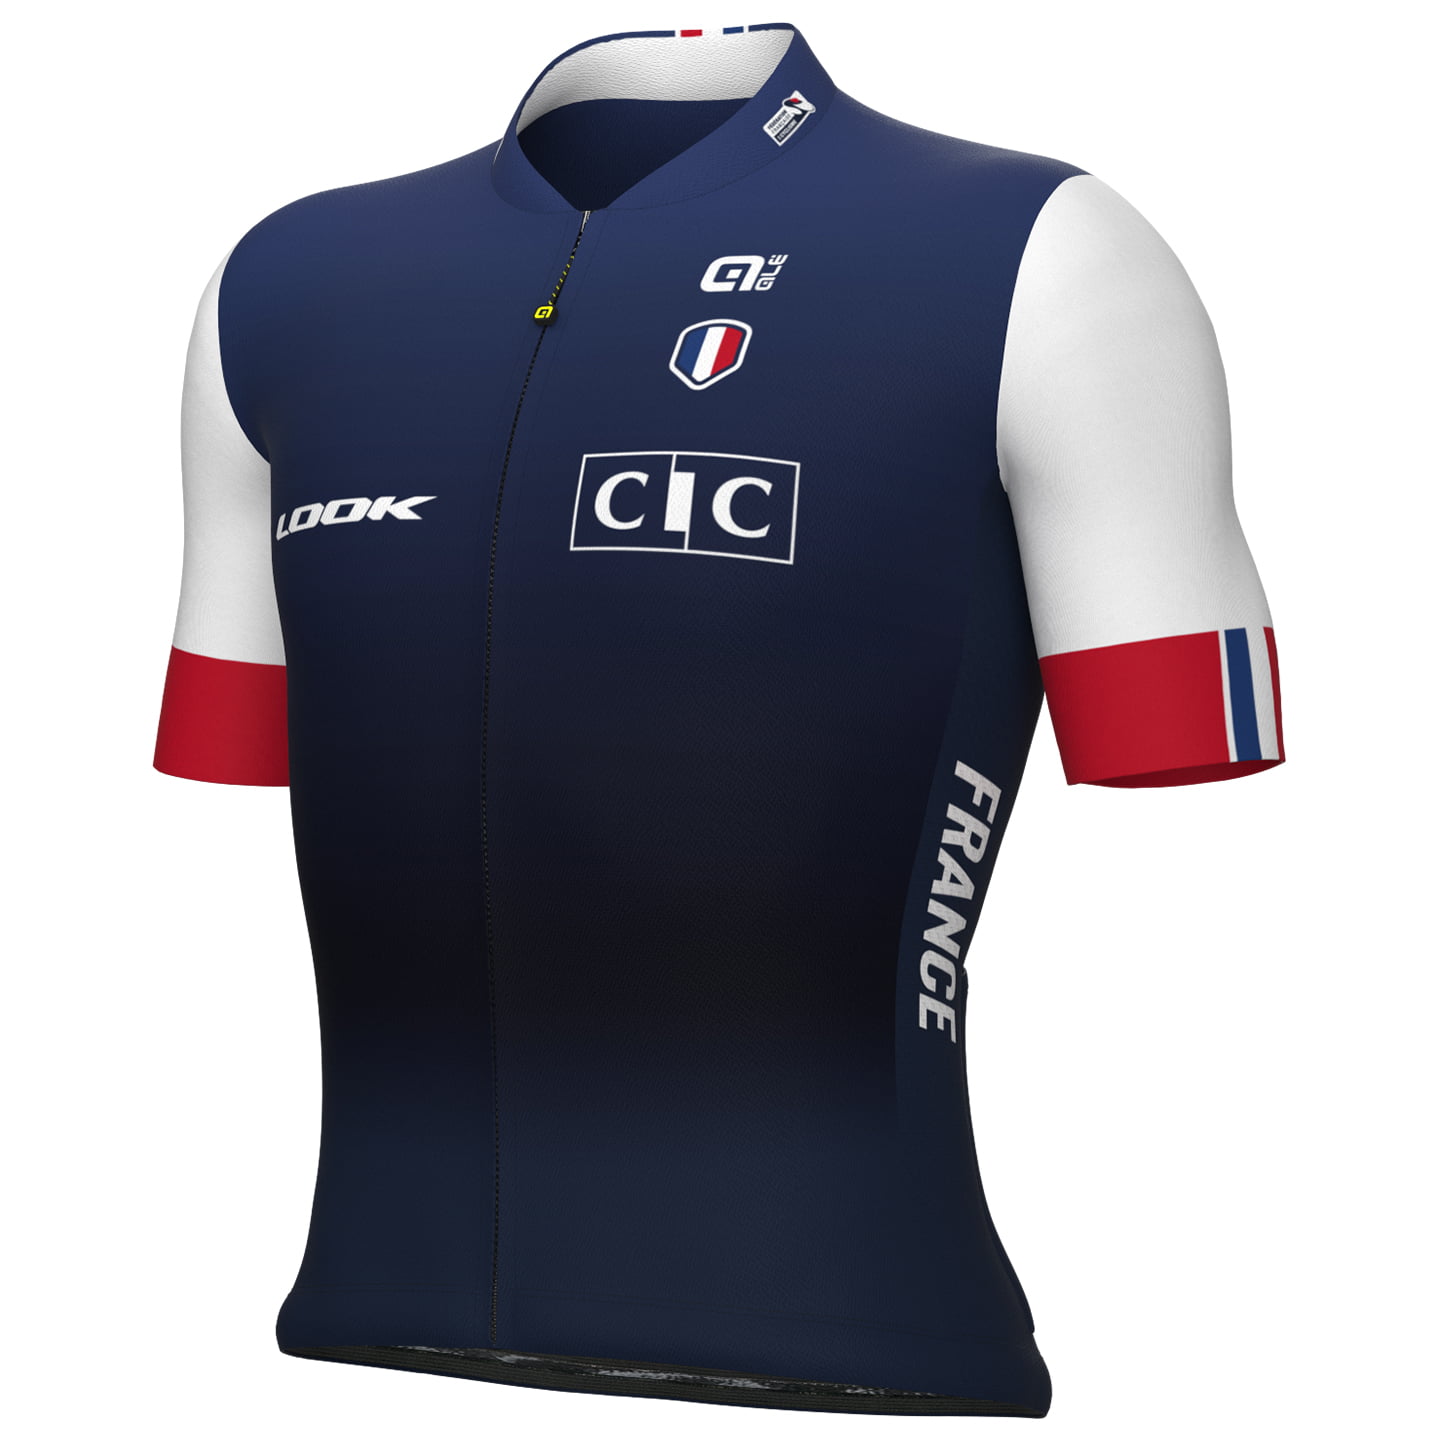 FRENCH NATIONAL TEAM 2023 Short Sleeve Jersey, for men, size XL, Bike Jersey, Cycle gear